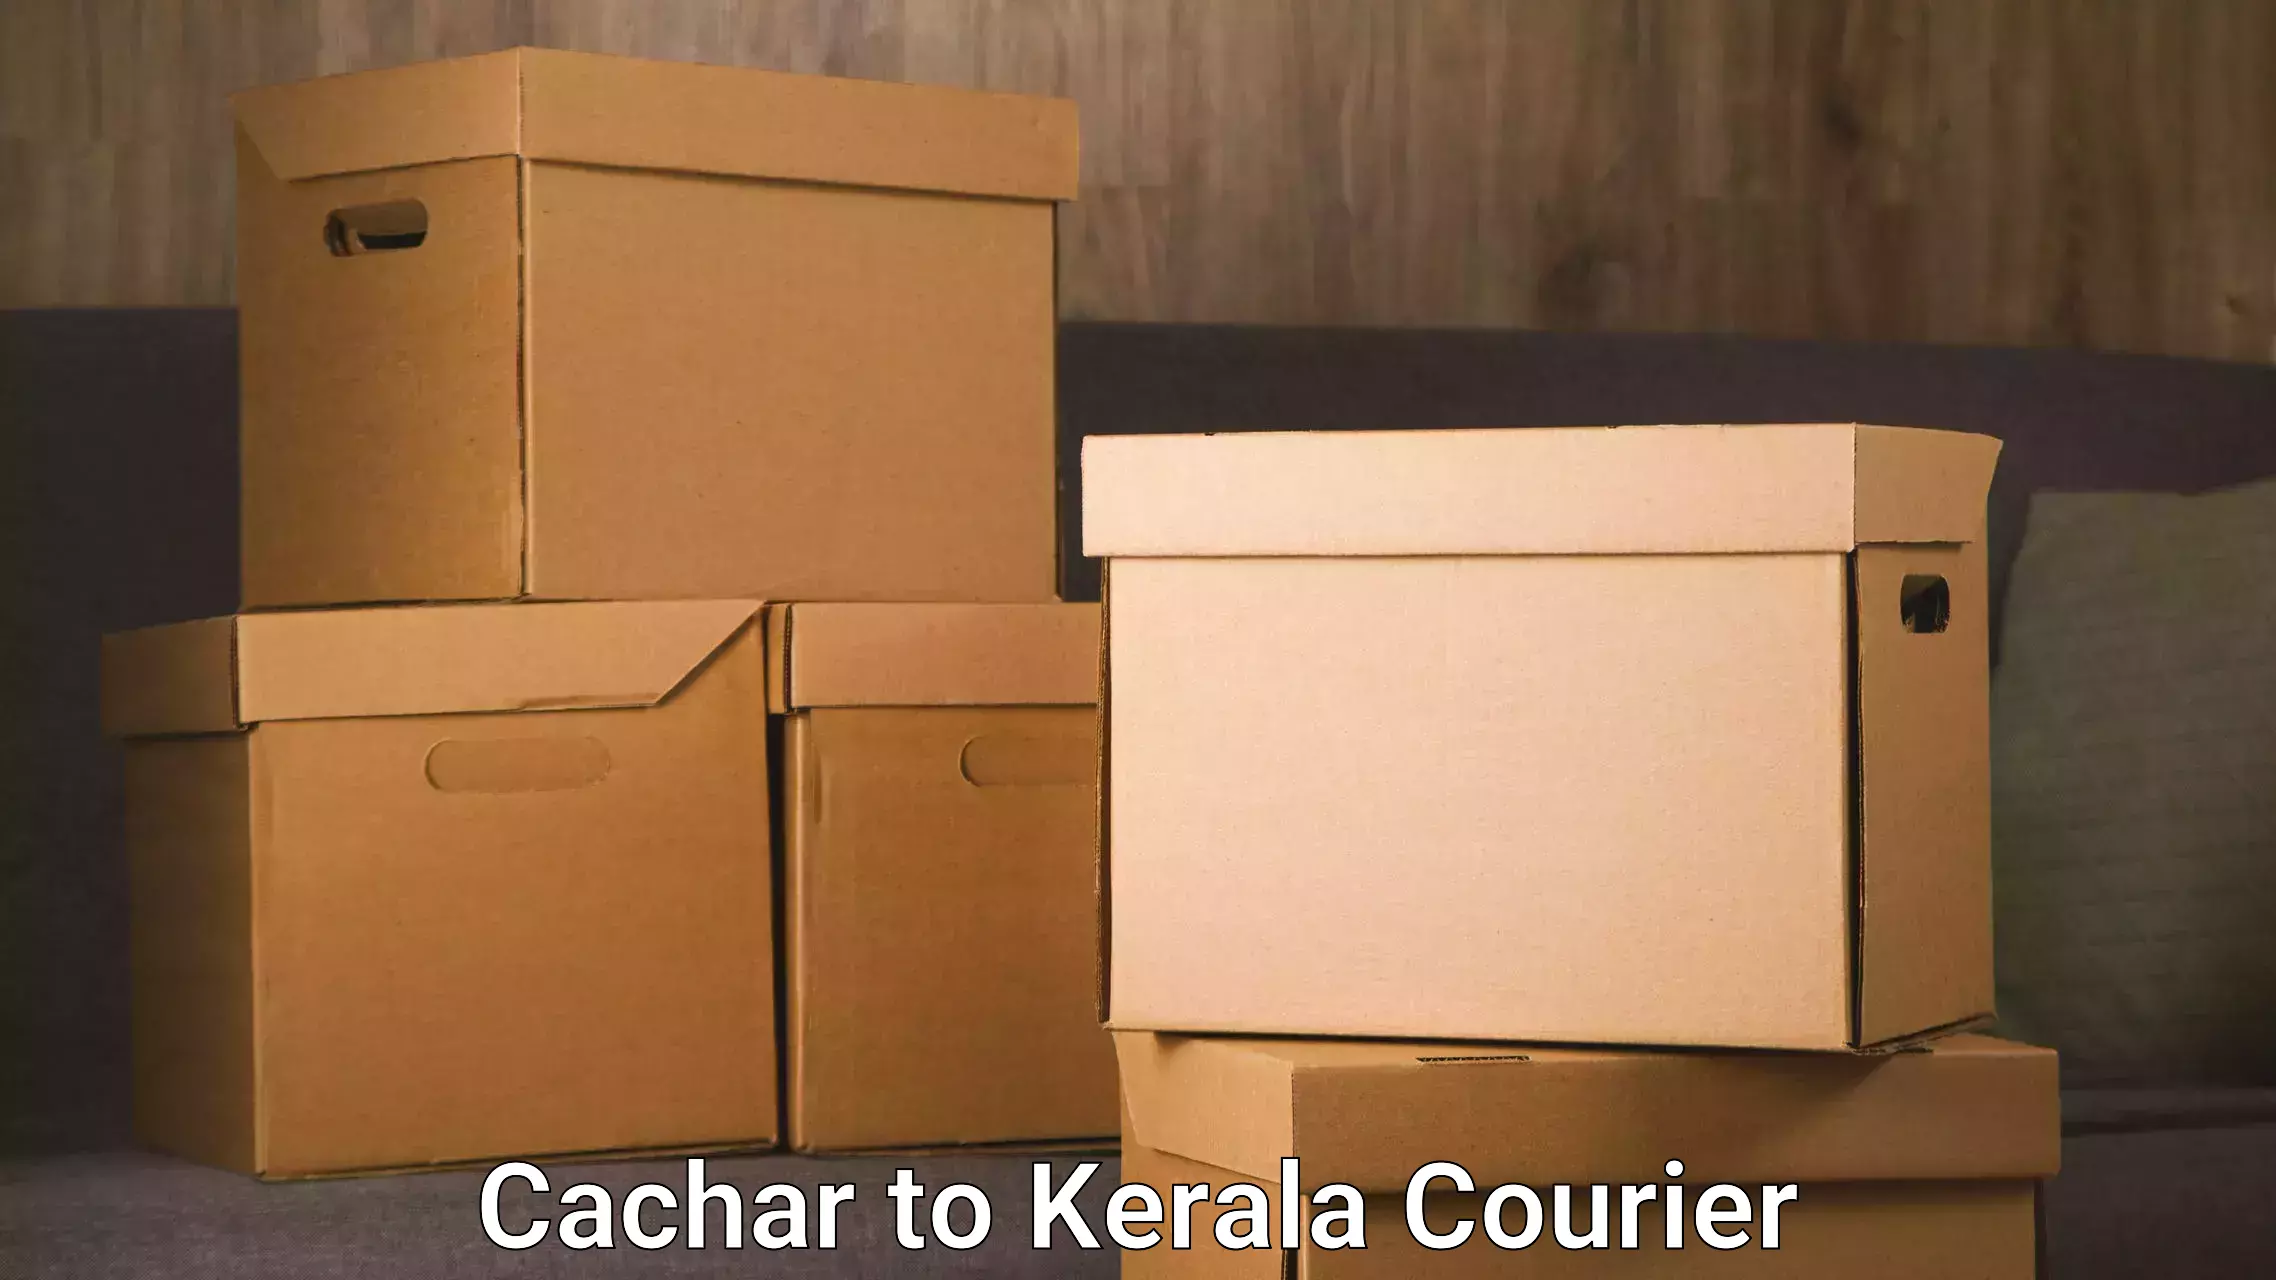 Professional parcel services Cachar to Kozhikode